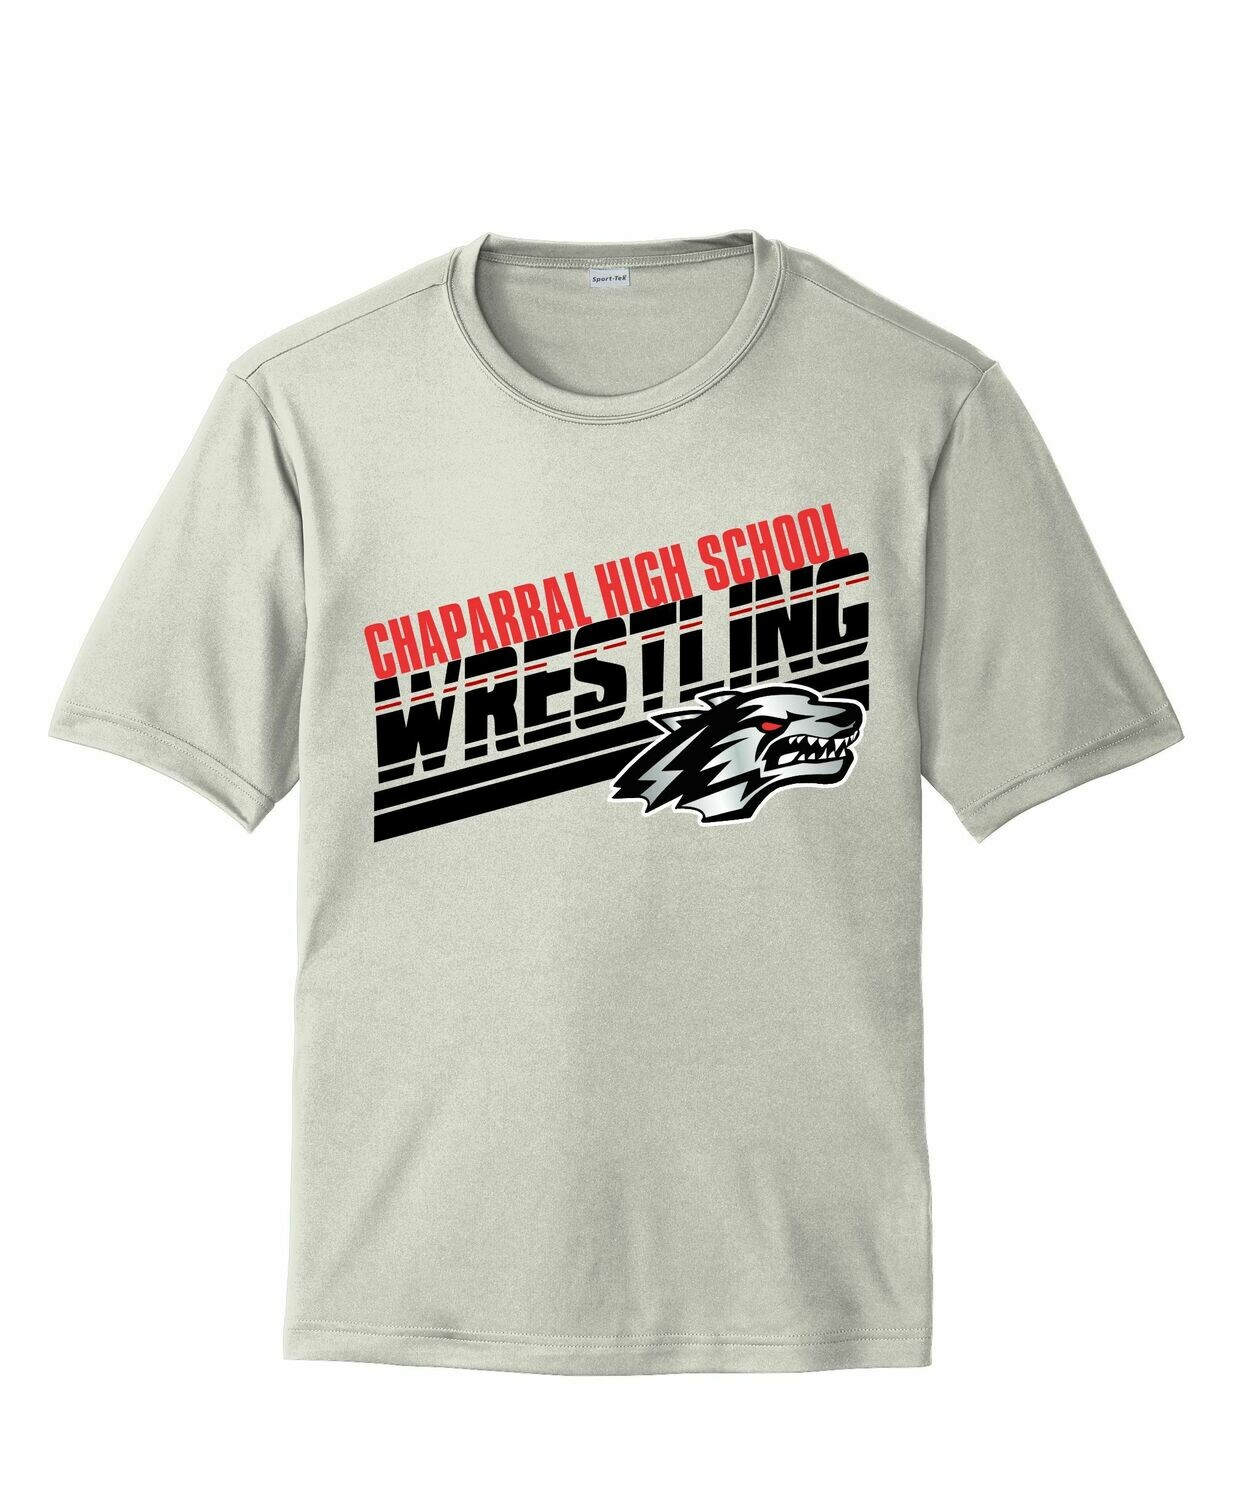 Chaparral High School Wrestling Sublimated Moisture Wicking Tee